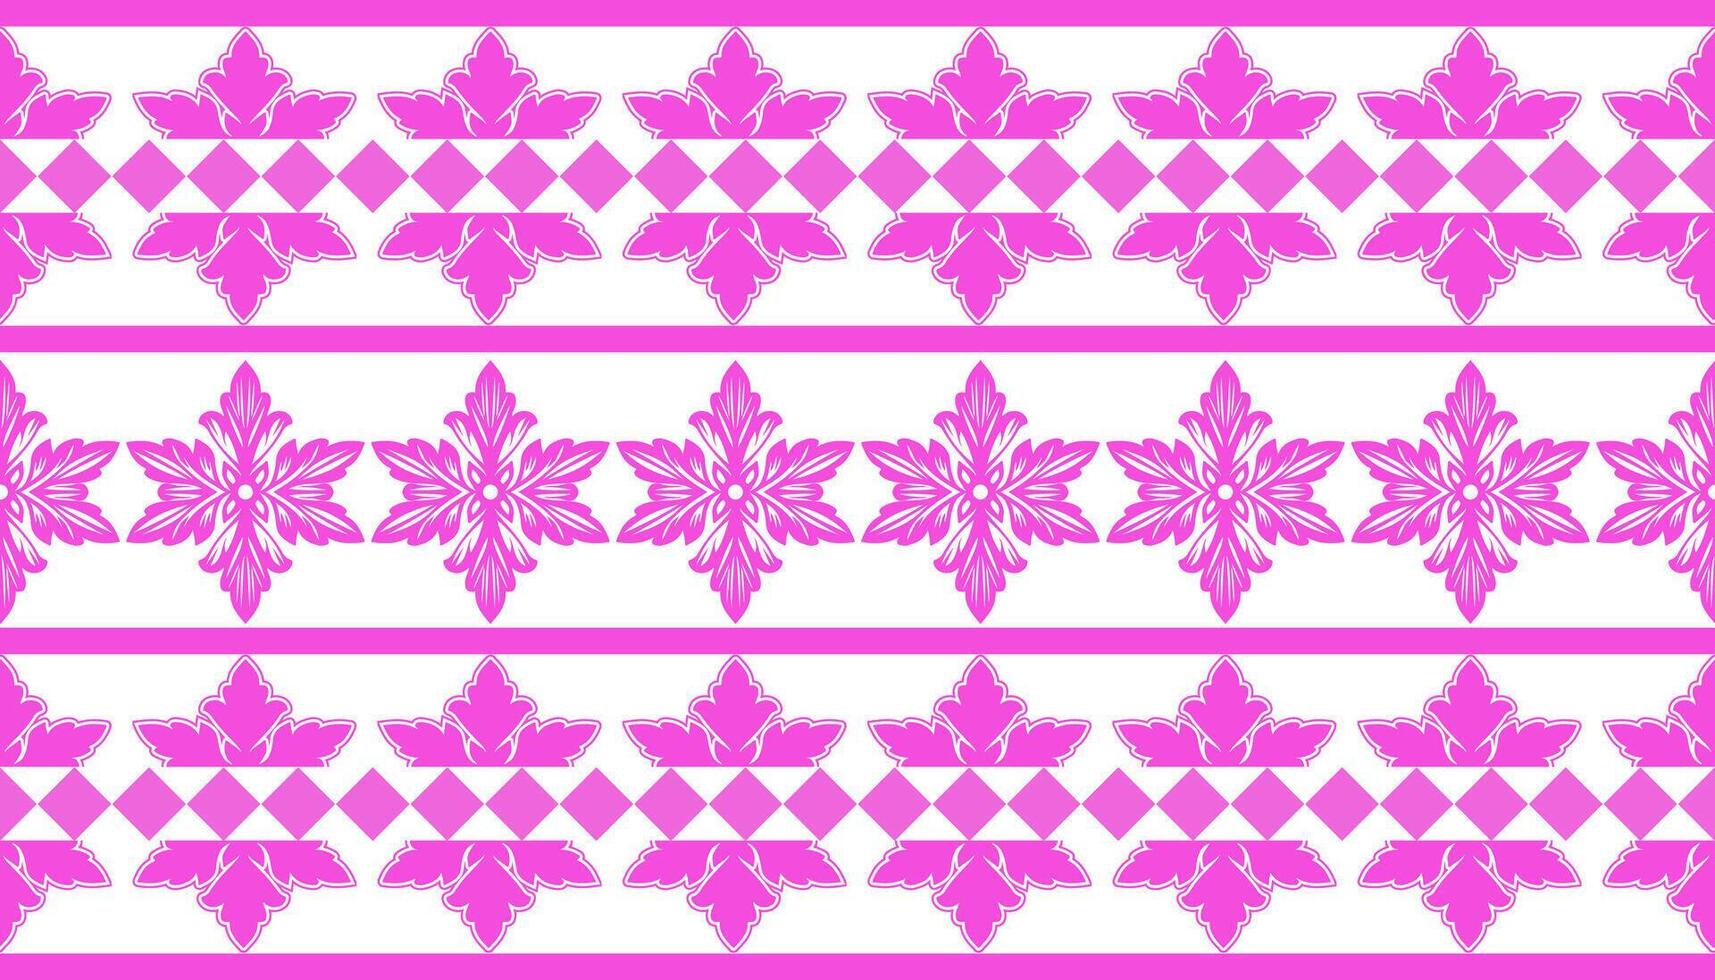 Damask iakt ethnic traditional Fabric textile seamless pattern decorative ornamental pinkl horizontal style. Curtain, carpet, wallpaper, clothing, wrapping, textile vector